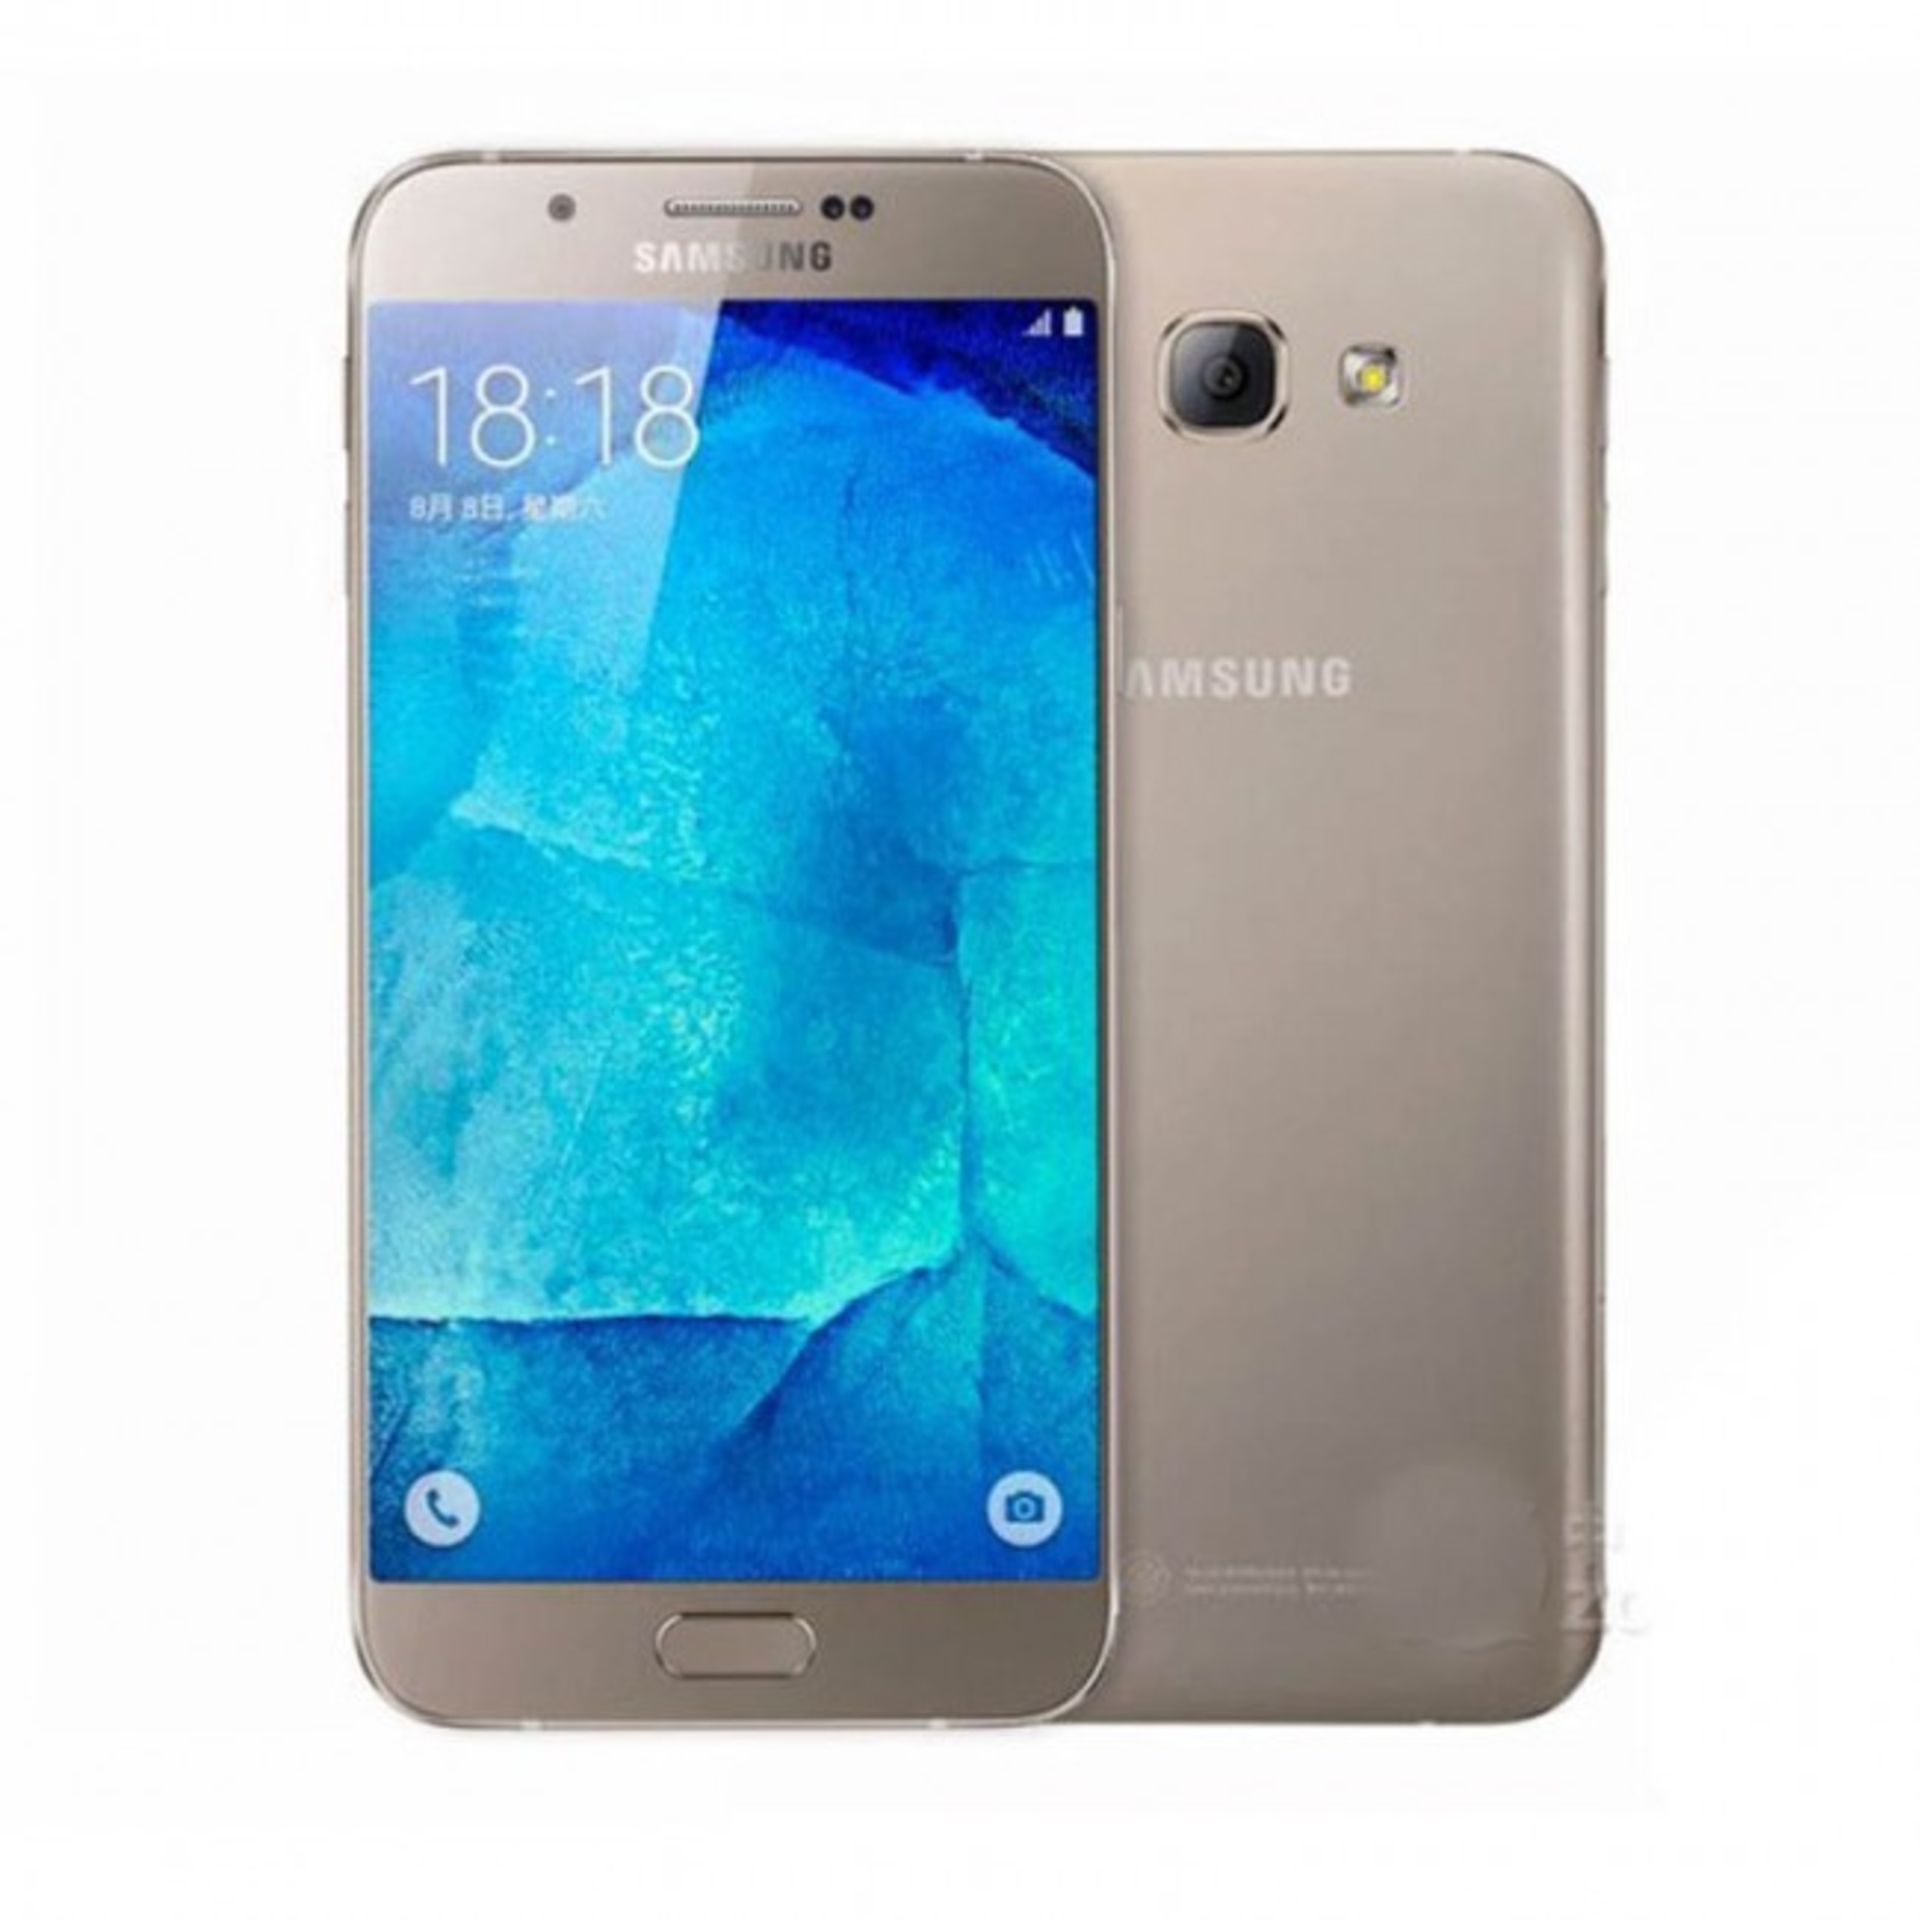 Grade A Samsung A8000 Colours May Vary Item available approx 12 working days after sale